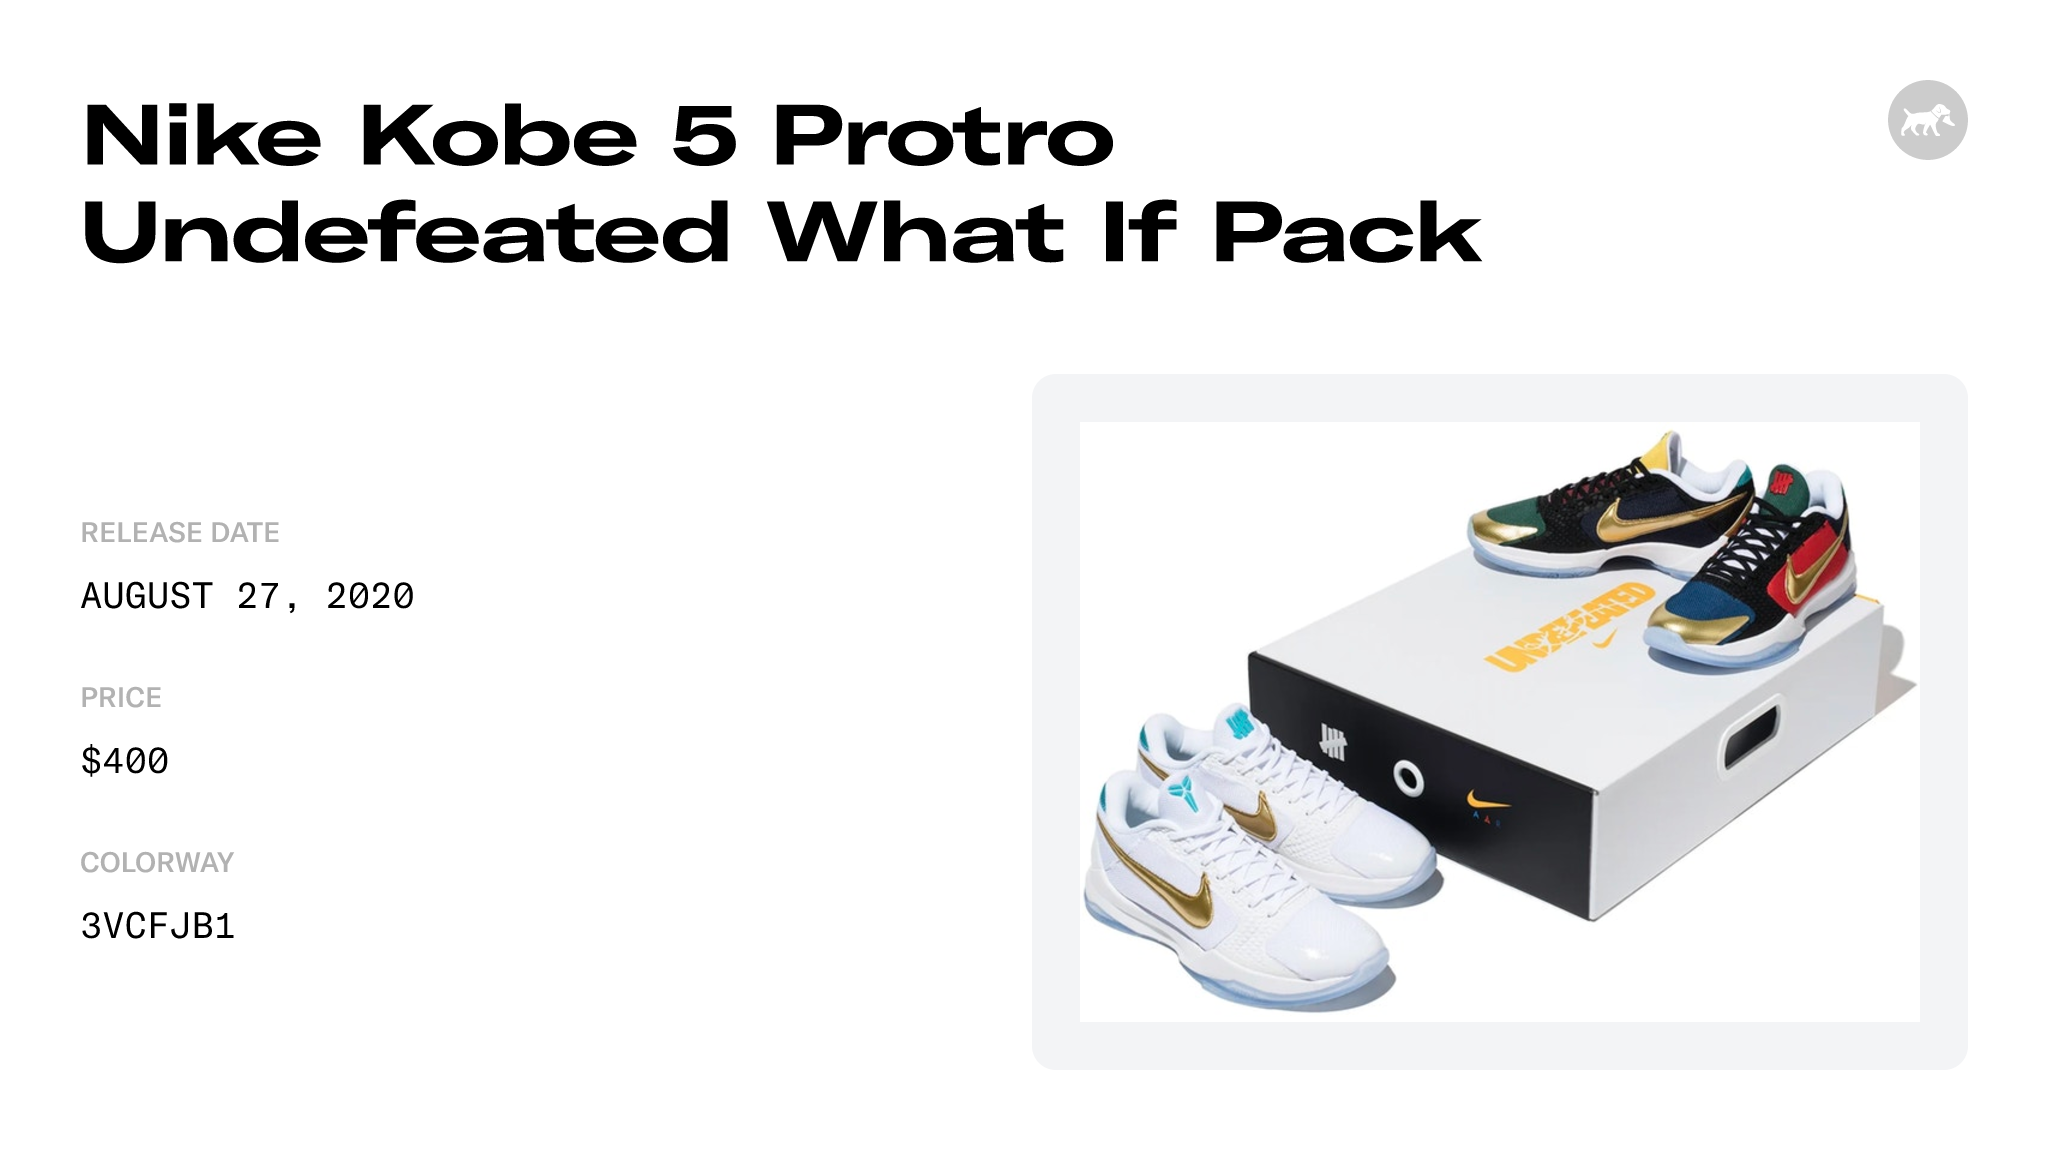 Nike Kobe 5 Protro Undefeated What If Pack - 3VCFJB1 Raffles and Release  Date